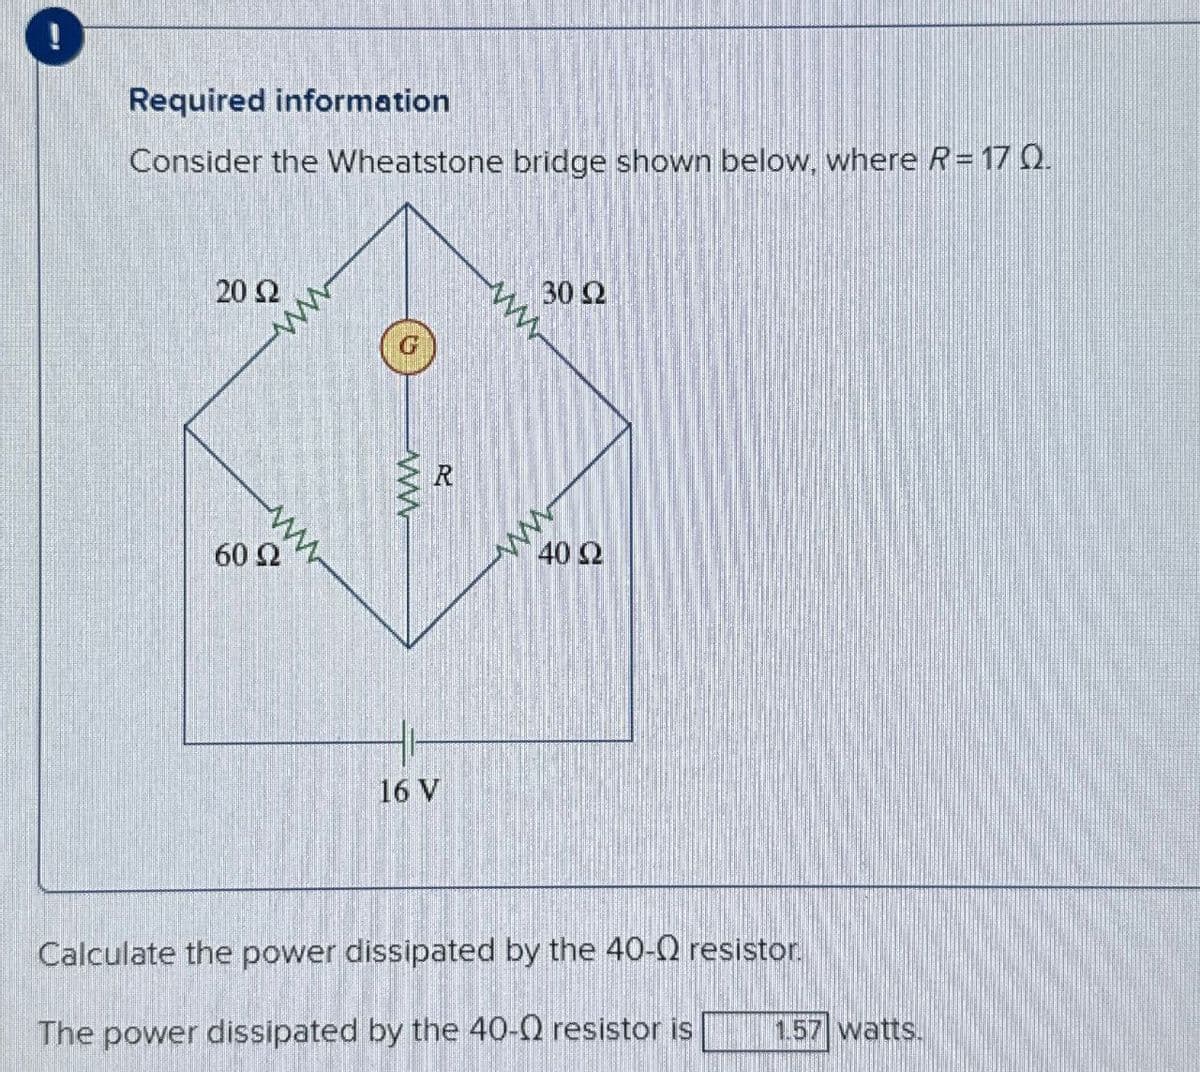 Required information
Consider the Wheatstone bridge shown below, where R= 17 Q.
20 Ω
60 Ω
N
www
R
30 Ω
www
16 V
40 Ω
1.57 watts.
Calculate the power dissipated by the 40-Q resistor.
The power dissipated by the 40-Q resistor is